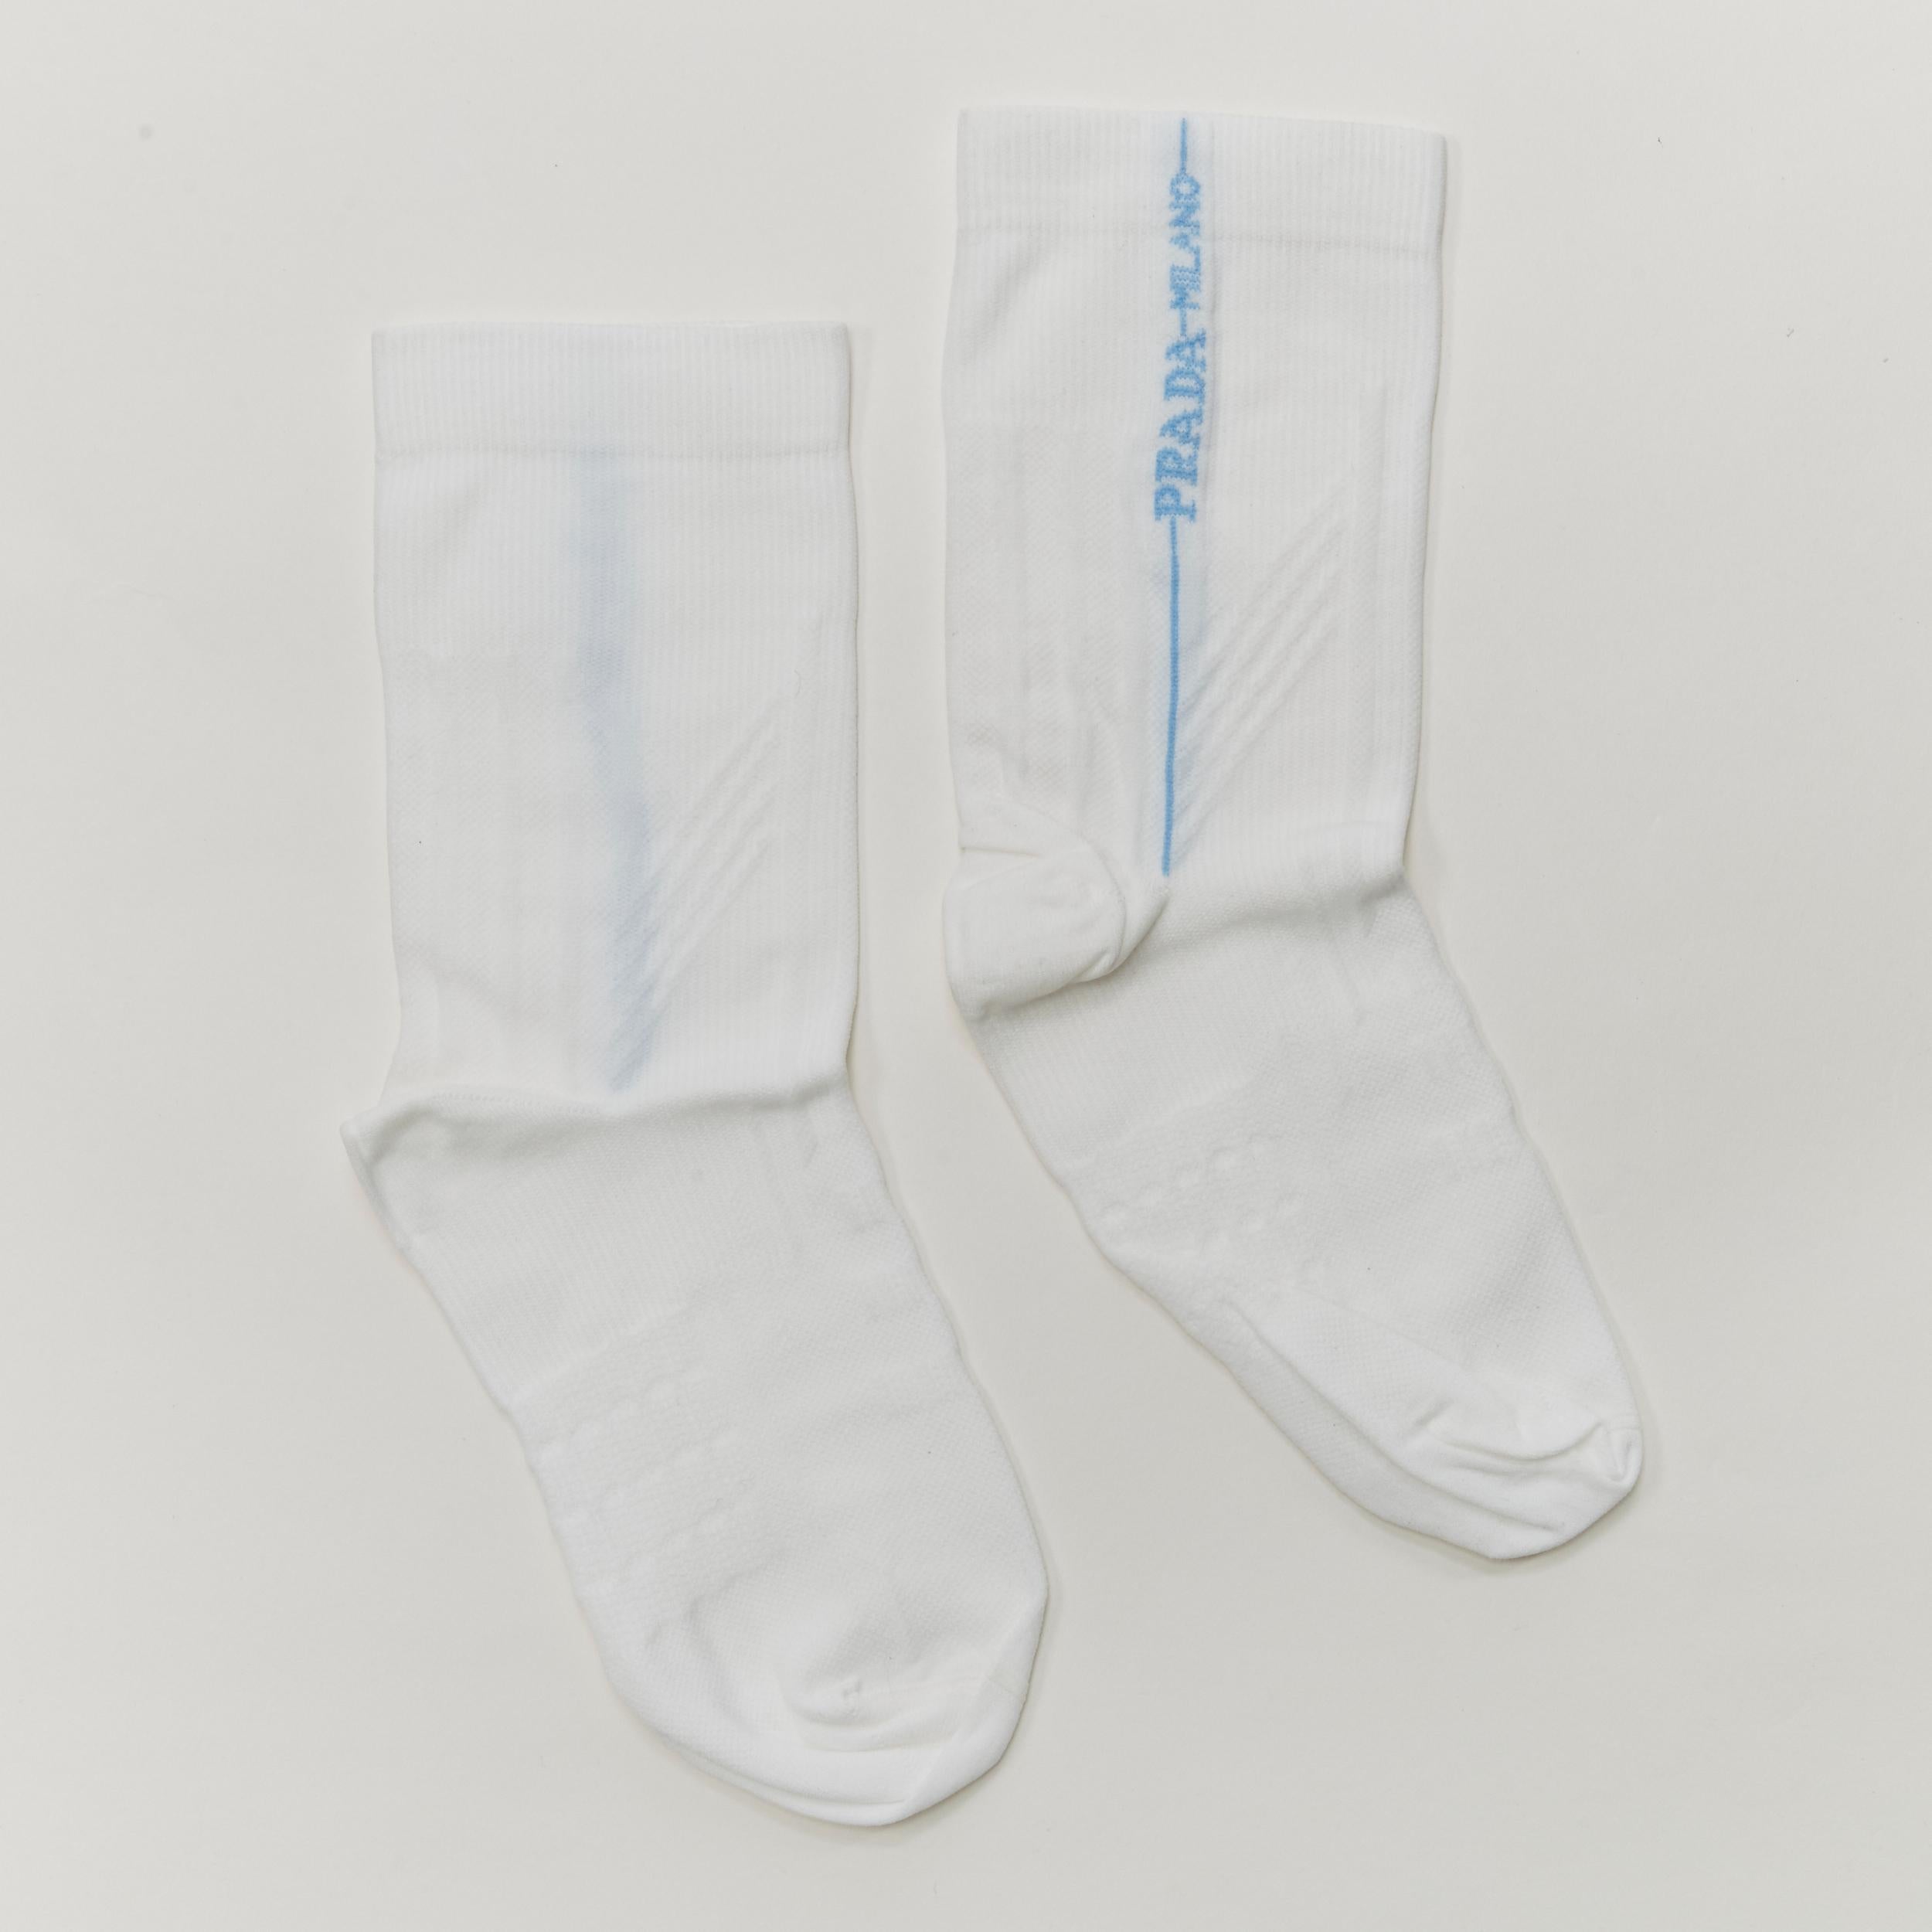 new PRADA white cotton blue Milano logo line short socks
Brand: Prada
Designer: Miuccia Prada
Material: Cotton
Color: White
Pattern: Solid
Made in: Italy

CONDITION:
Condition: New without tags. 

This Prada item is authentic. 


















